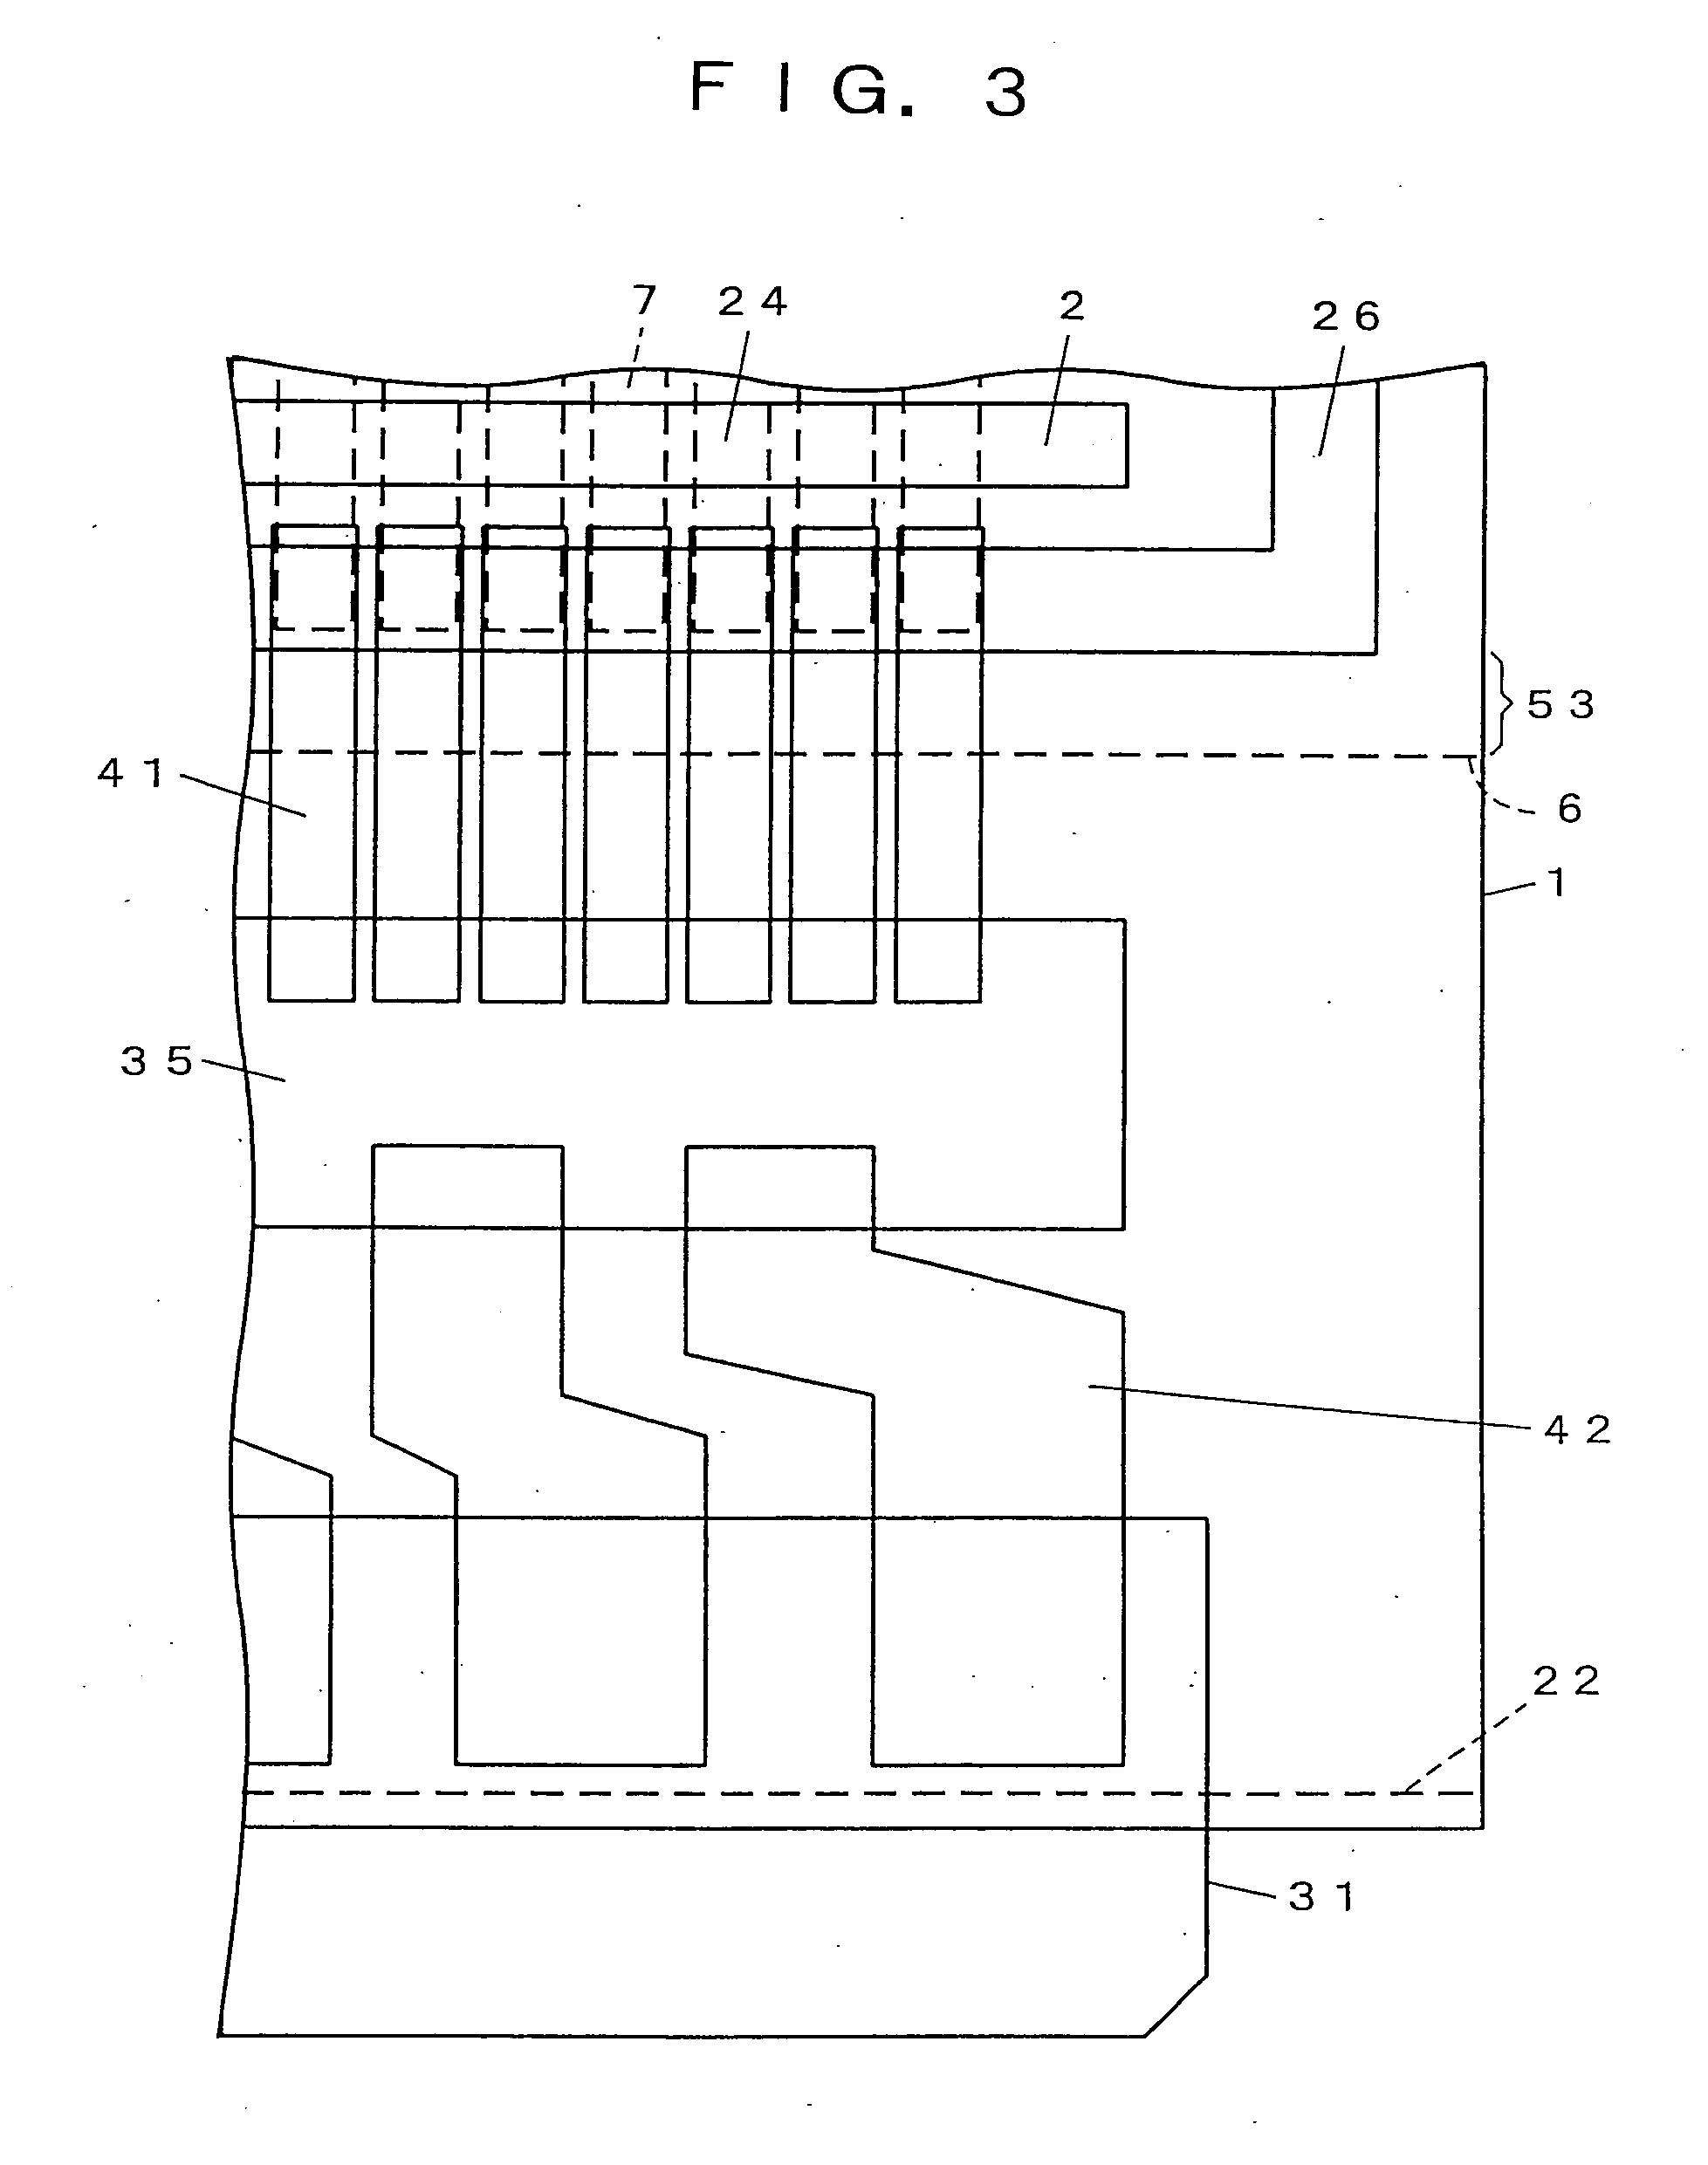 Liquid crystal display panel and its manufacturing method